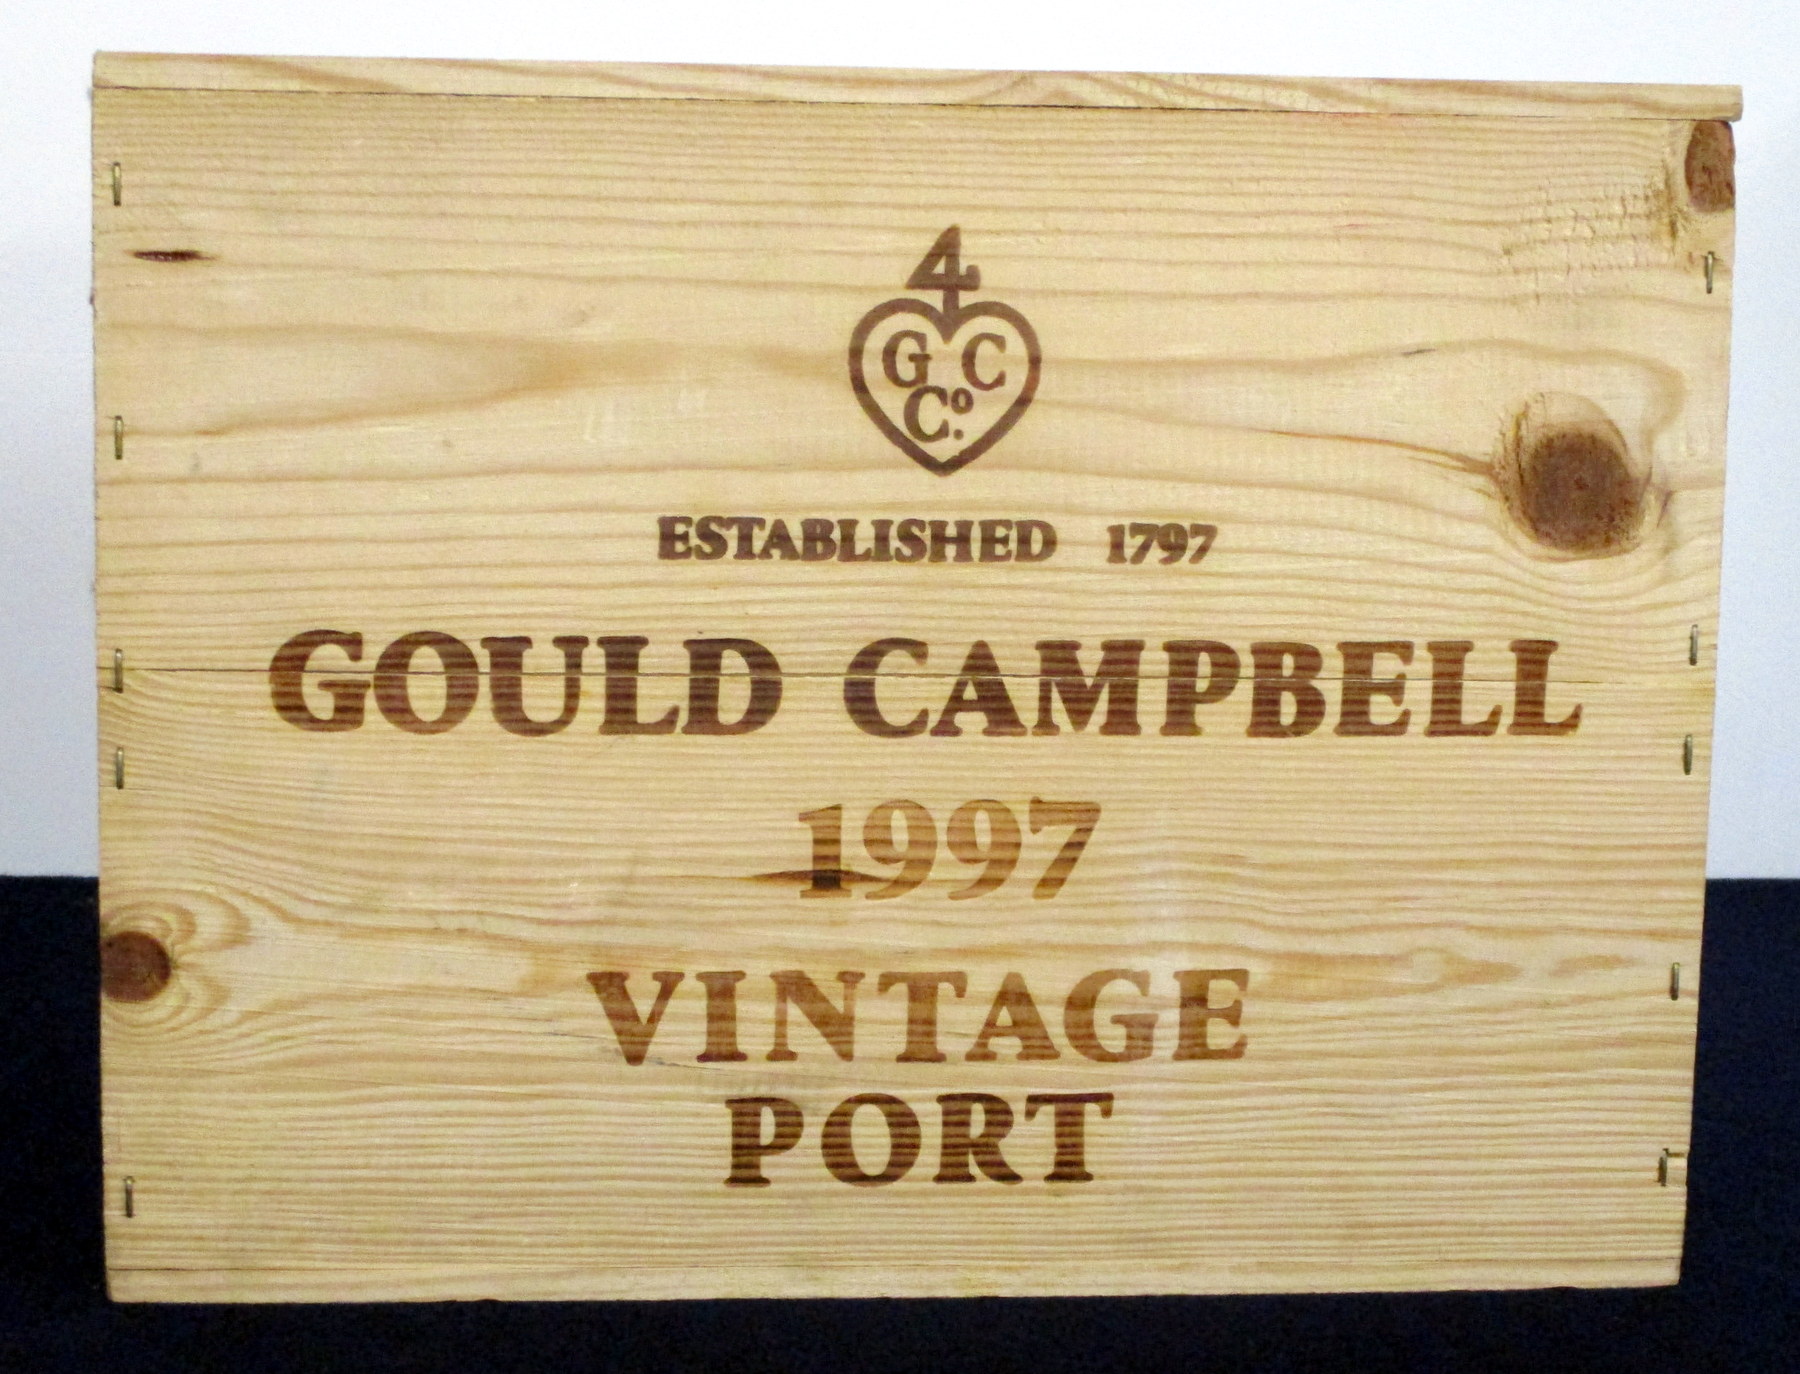 12 bts Gould Campbell 1997 Bicentenary Vintage Port owc - Image 2 of 2